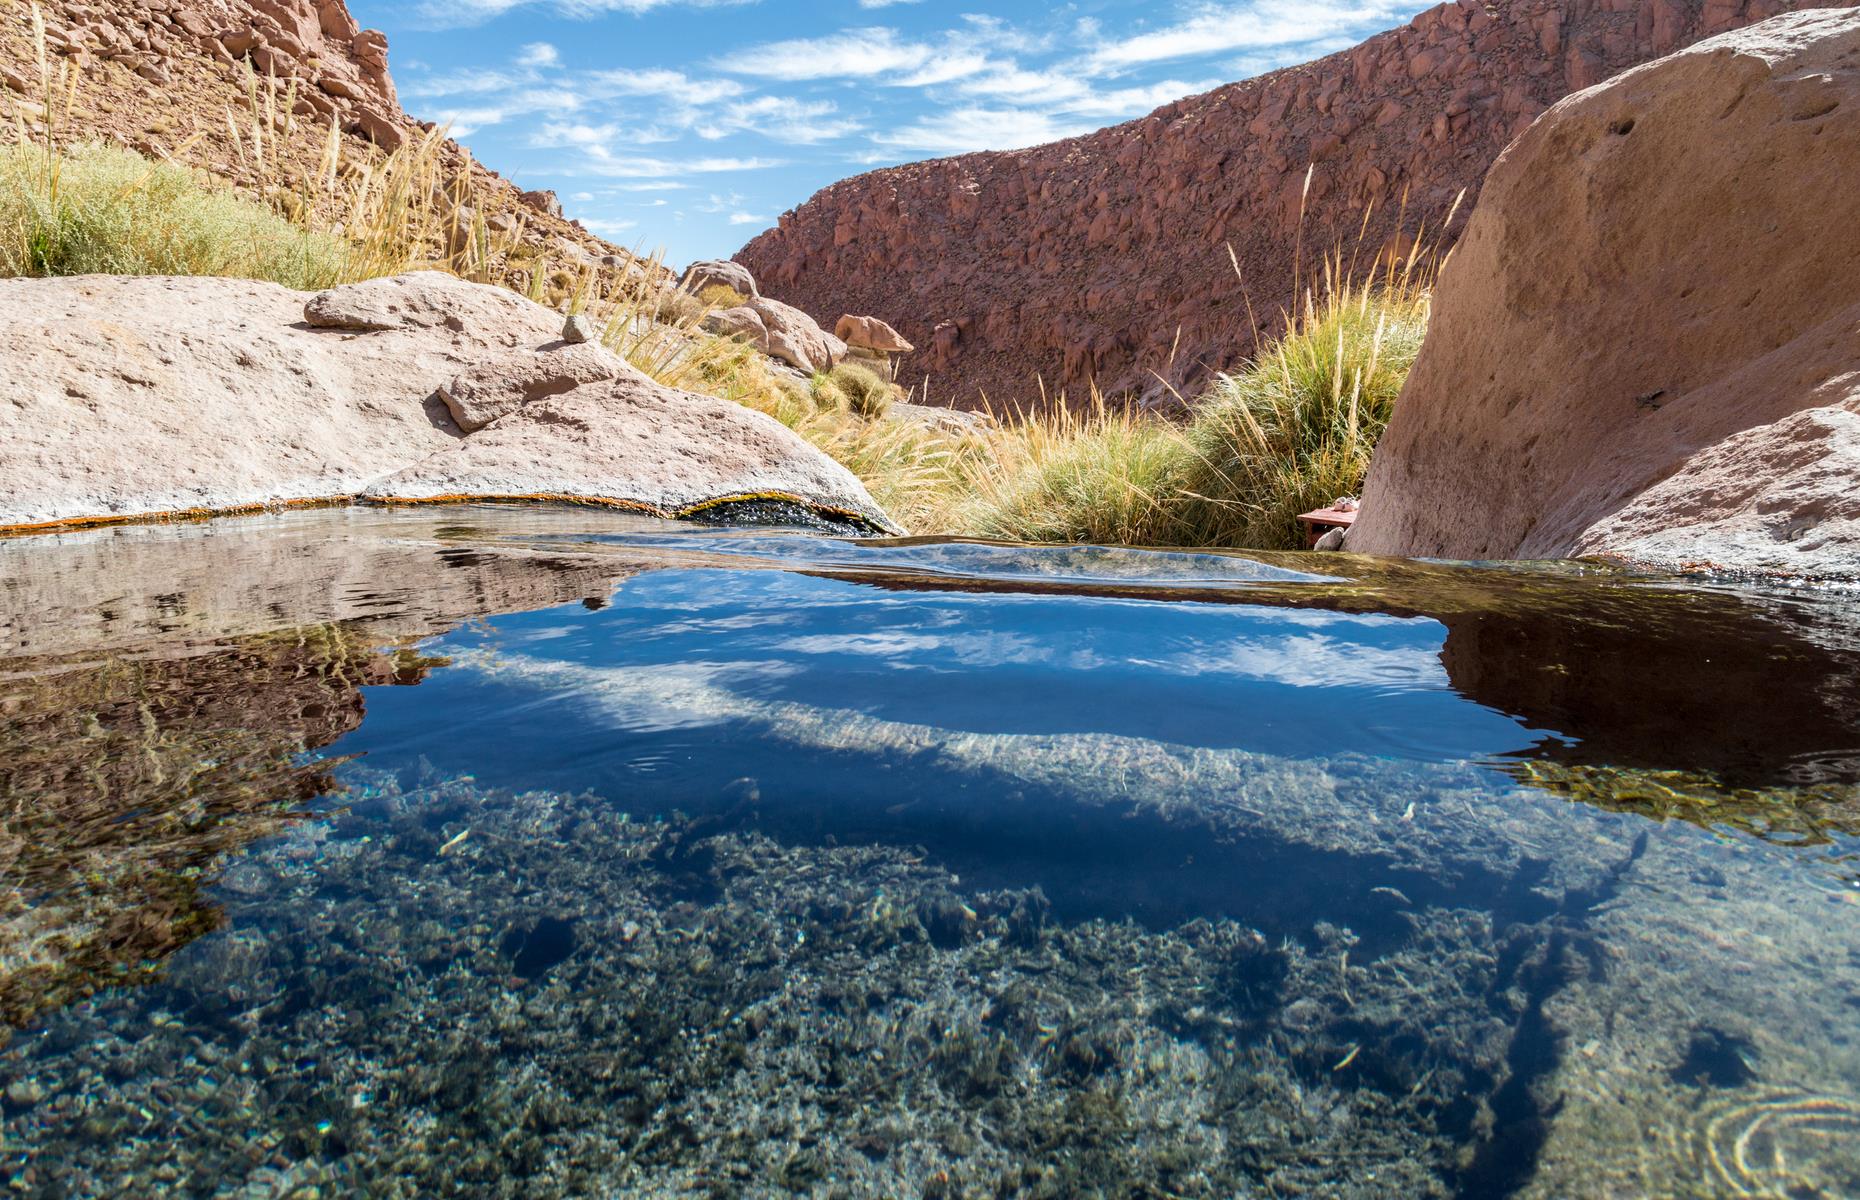 From healing mineral waters to dramatic geysers, Chile’s Atacama Desert is a hotspot for geothermal activity. At Puritama, you’ll find eight crystalline pools, set within a startling green oasis. Connected by a series of wooden walkways, the pools were believed by the Incas to have the ability to cure rheumatism and arthritis.